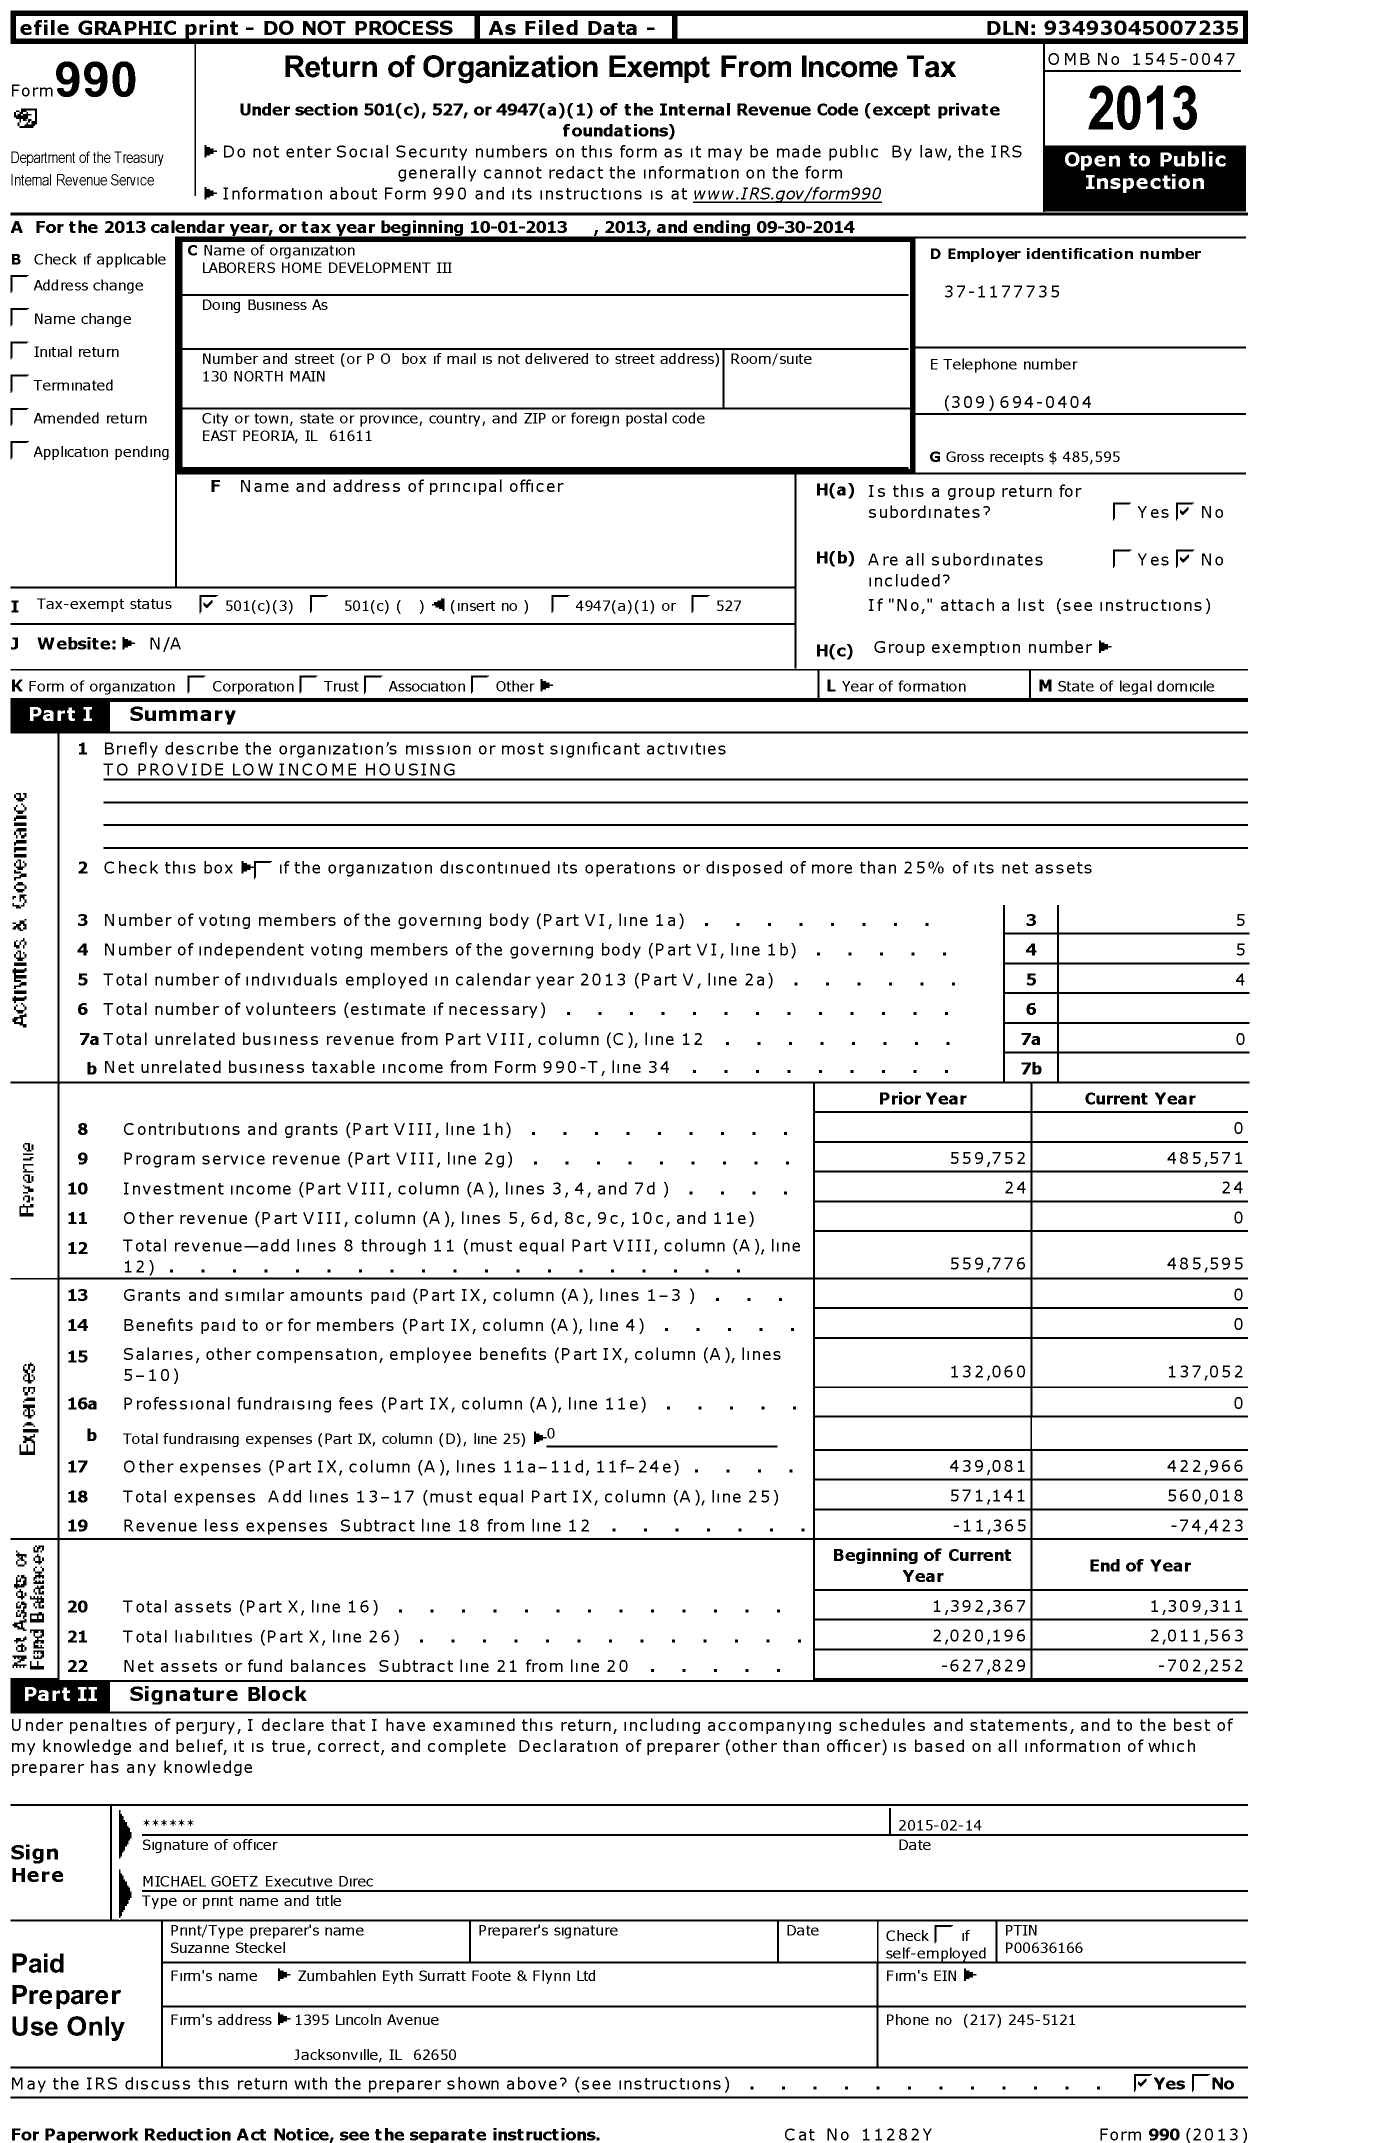 Image of first page of 2013 Form 990 for Laborers Home Development Iii